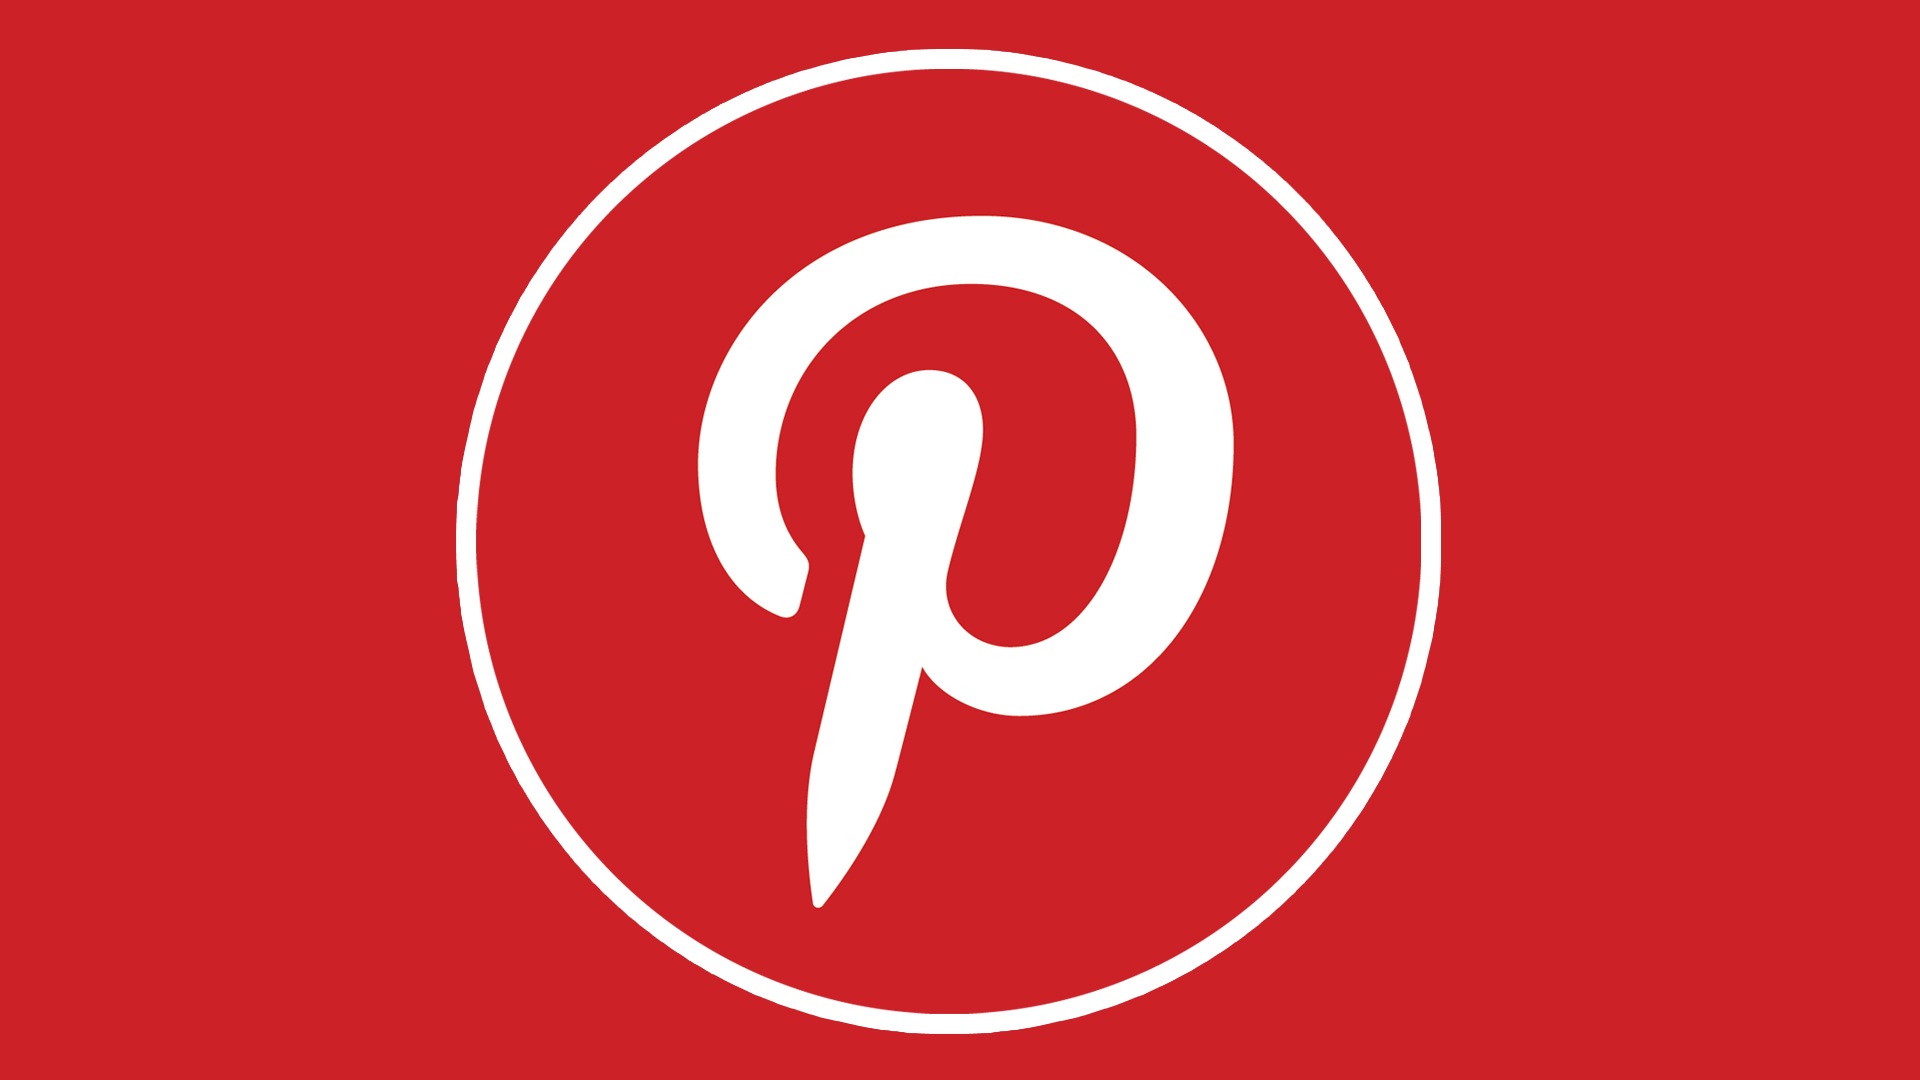 Pinterest crosses 200 million monthly active users 